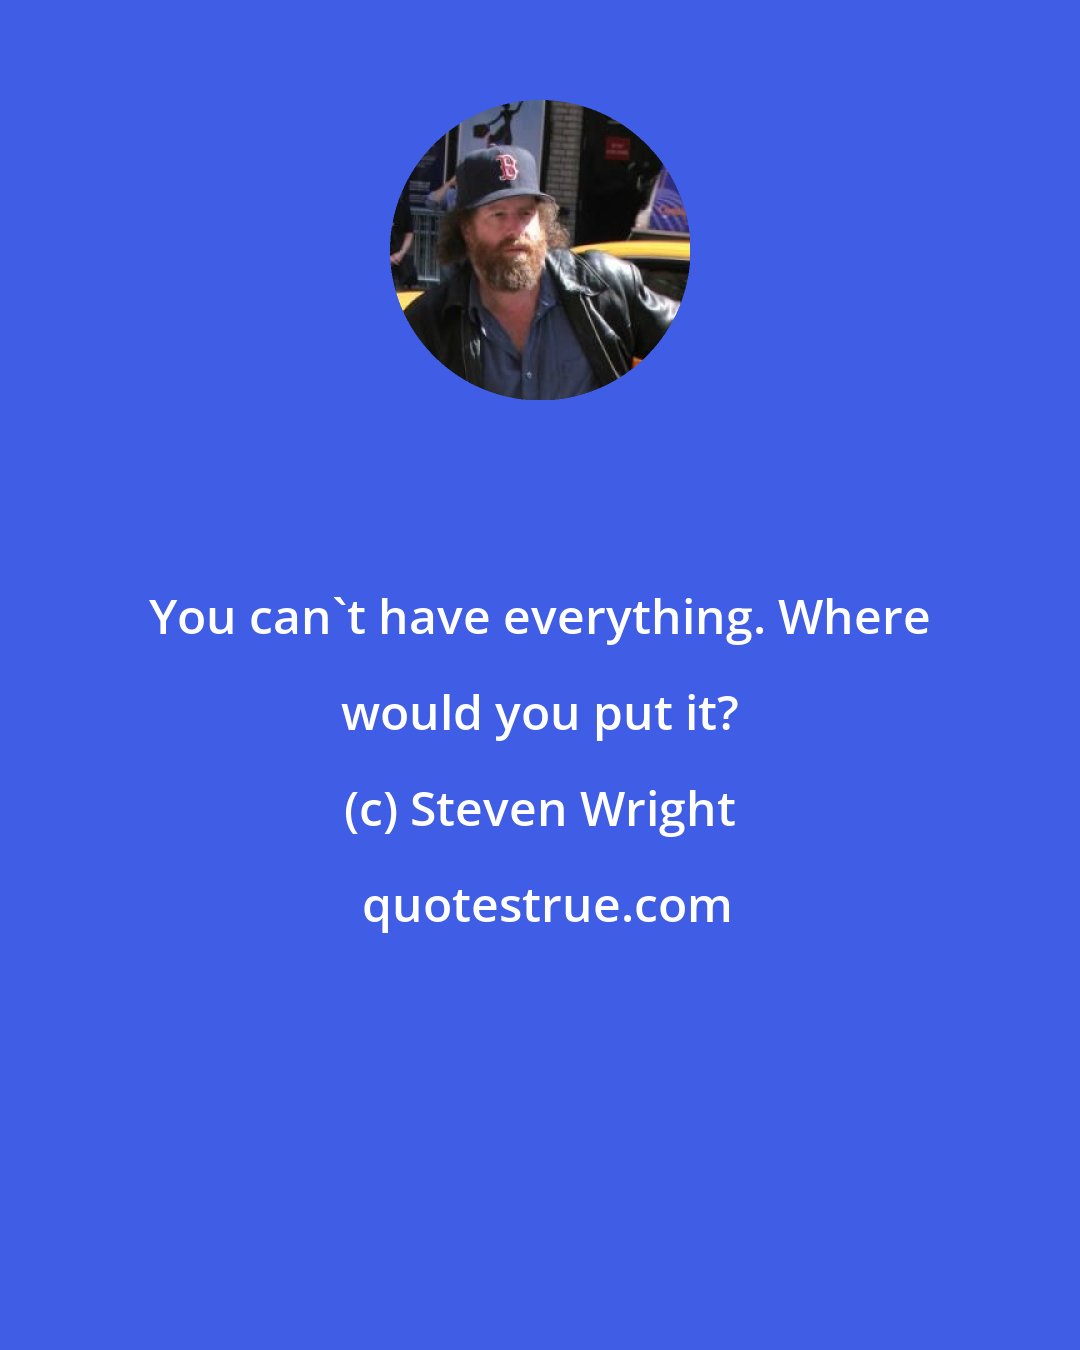 Steven Wright: You can't have everything. Where would you put it?